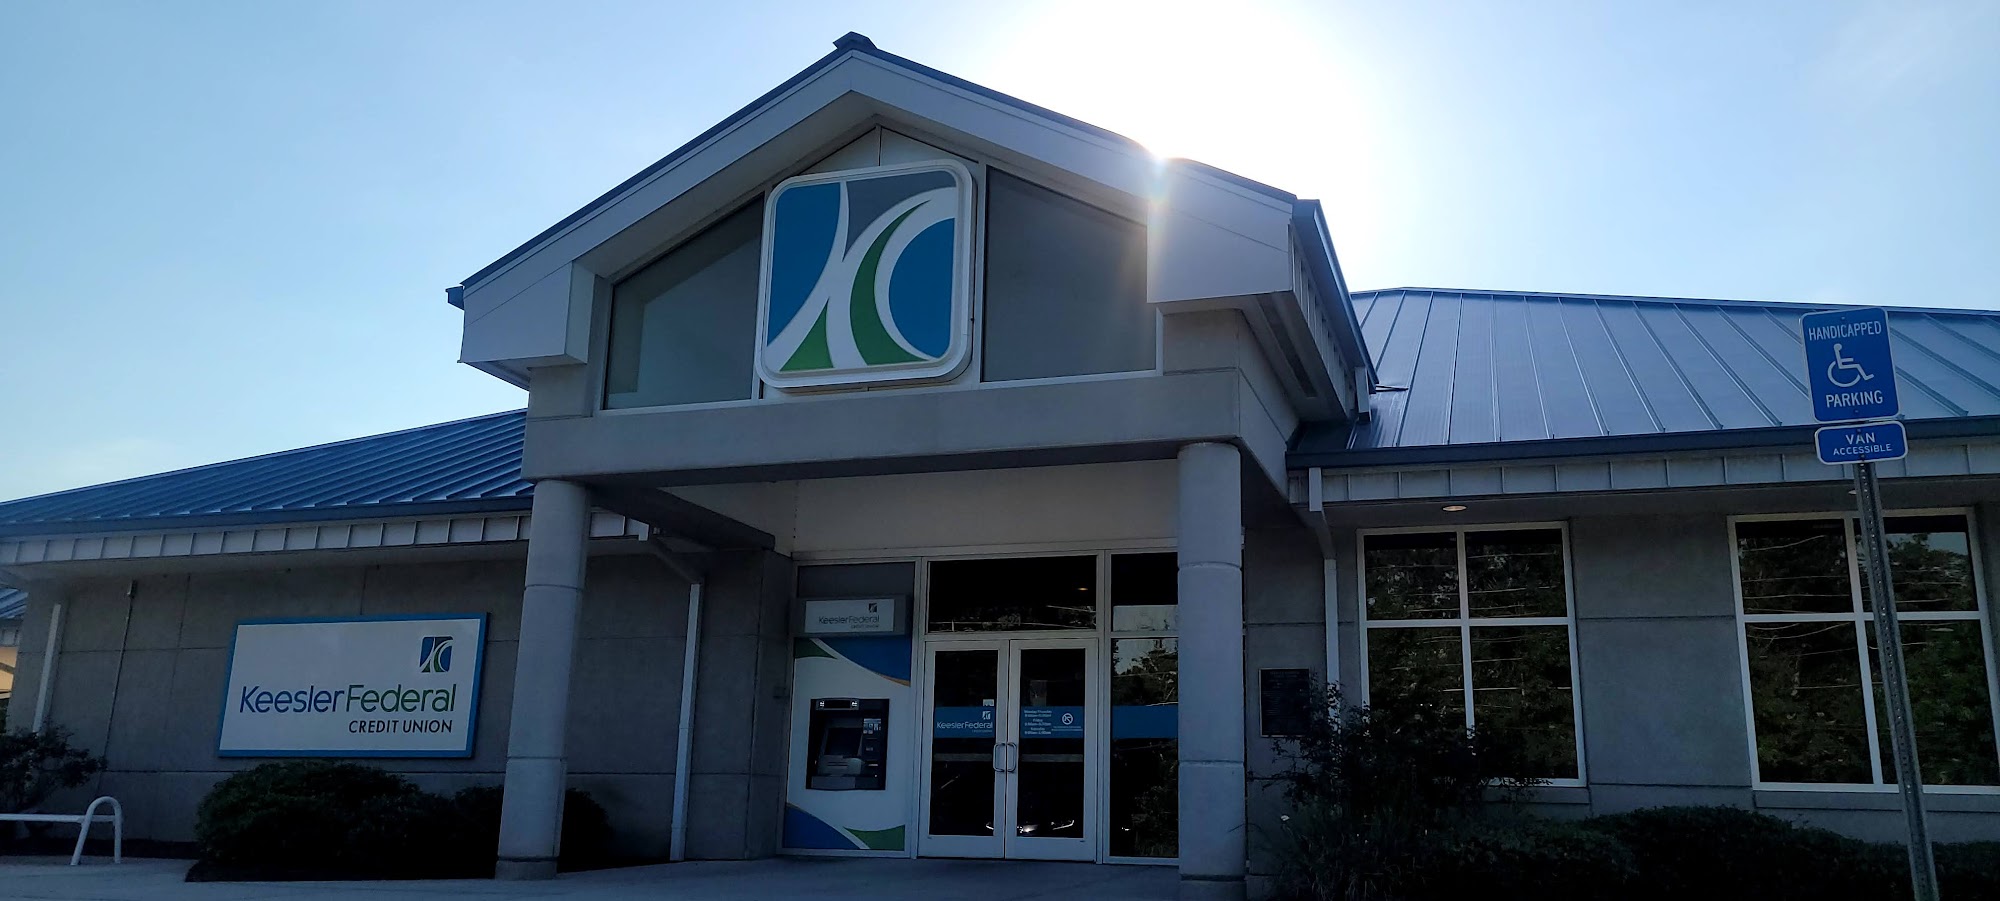 Keesler Federal Credit Union Long Beach Branch